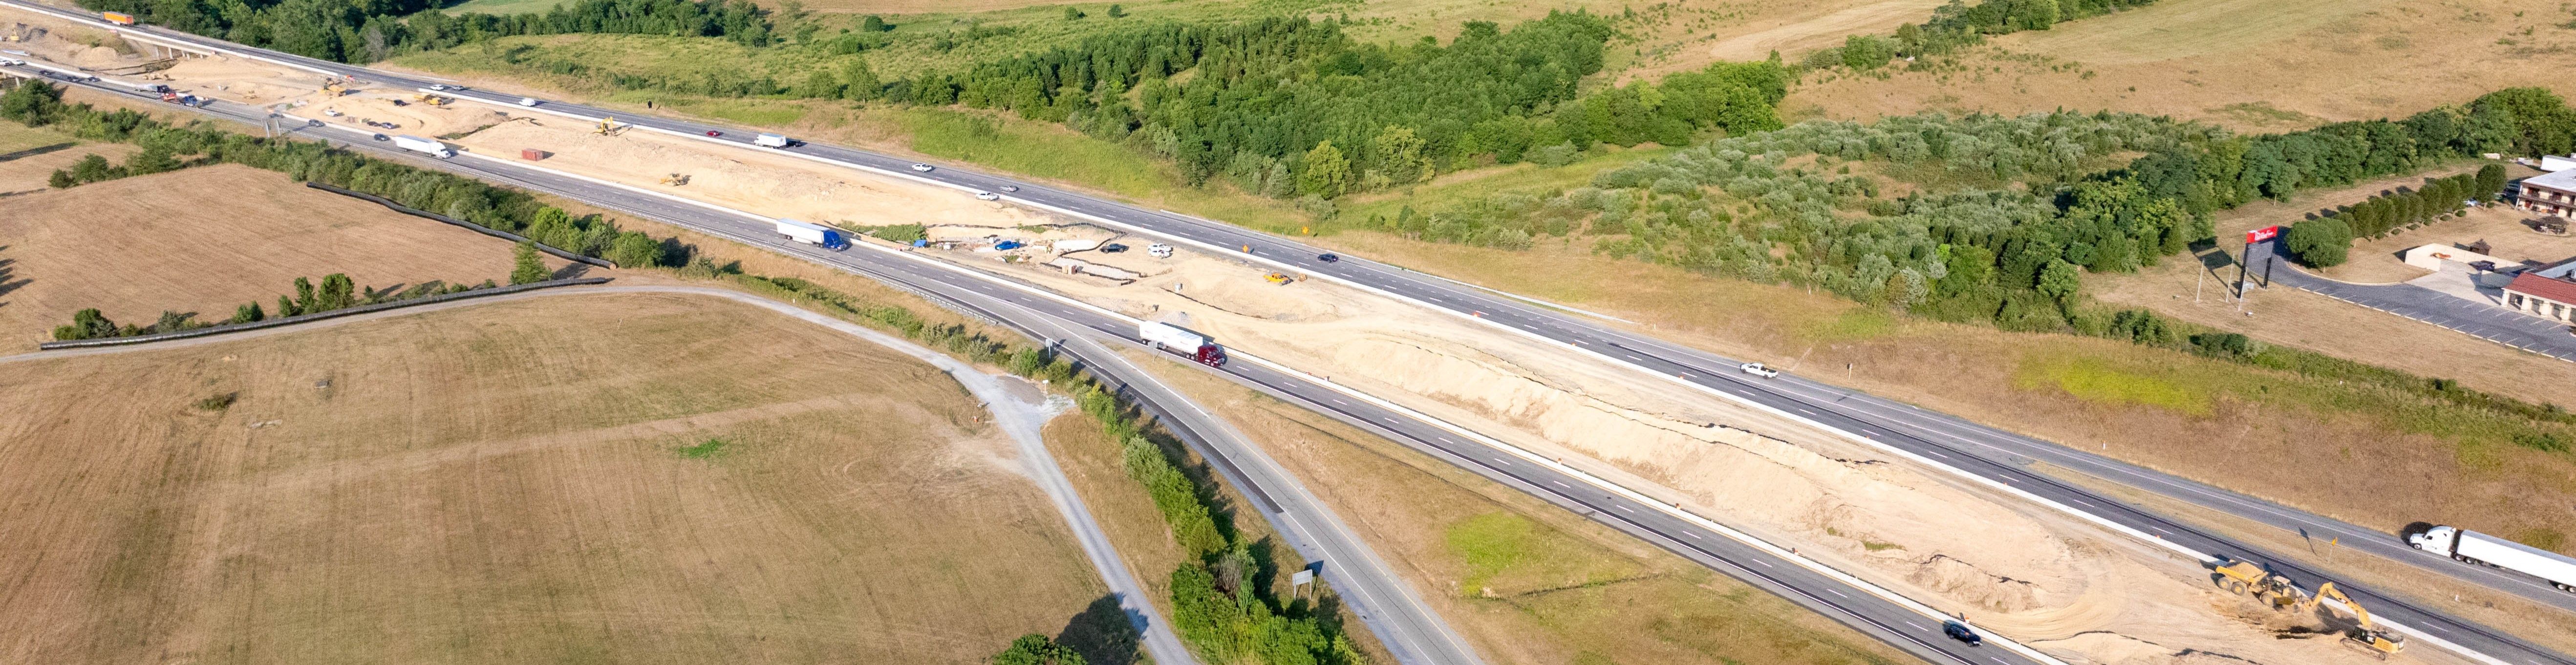 Aerial photo of I-81 near Staunton Virginia with construction taking place in the median